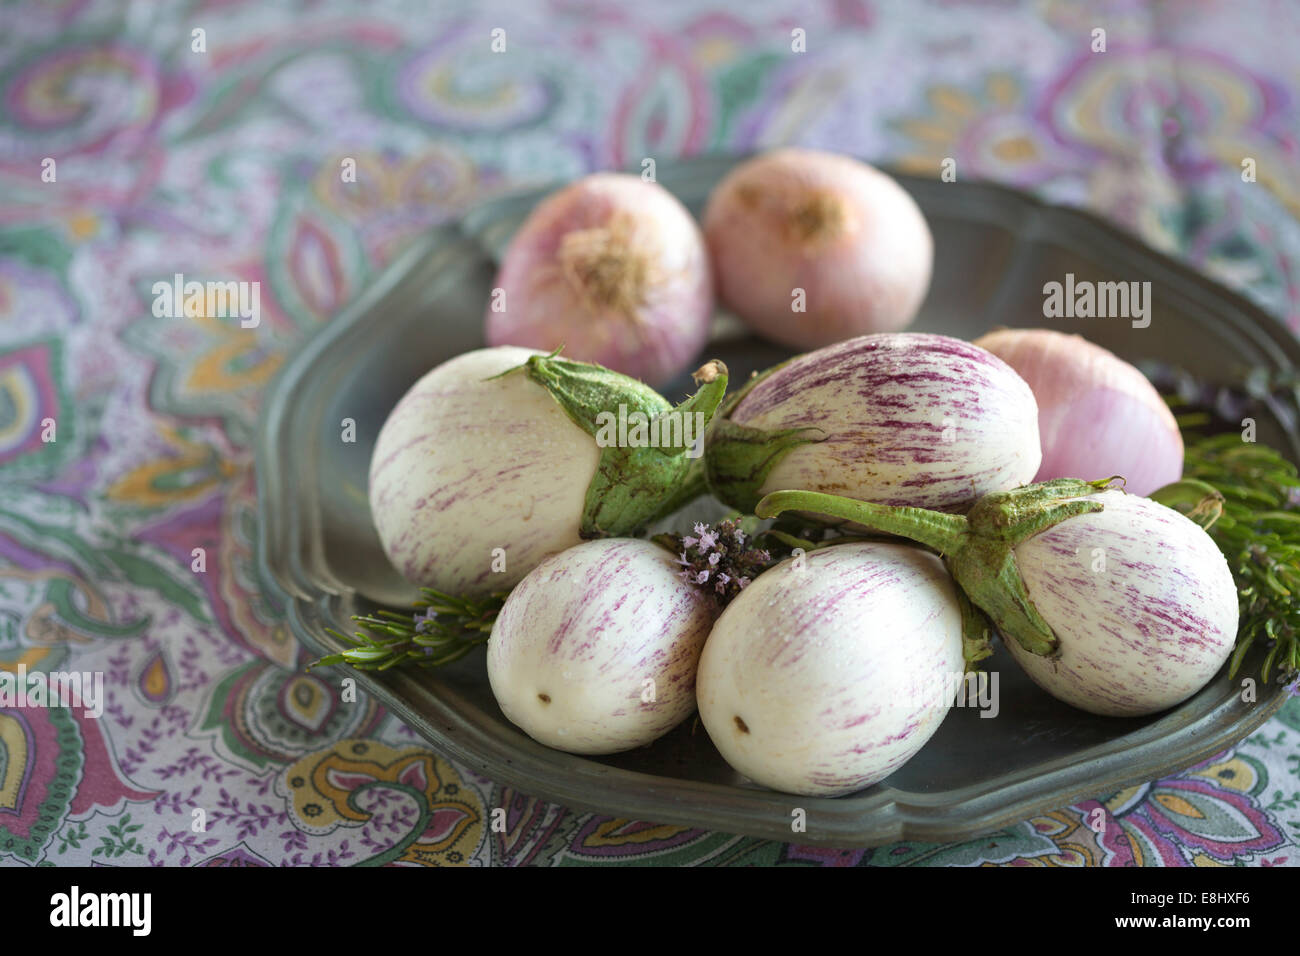 plated white aubergines with purple fine stripes and onion against purple floral tablecloth, text space, Stock Photo